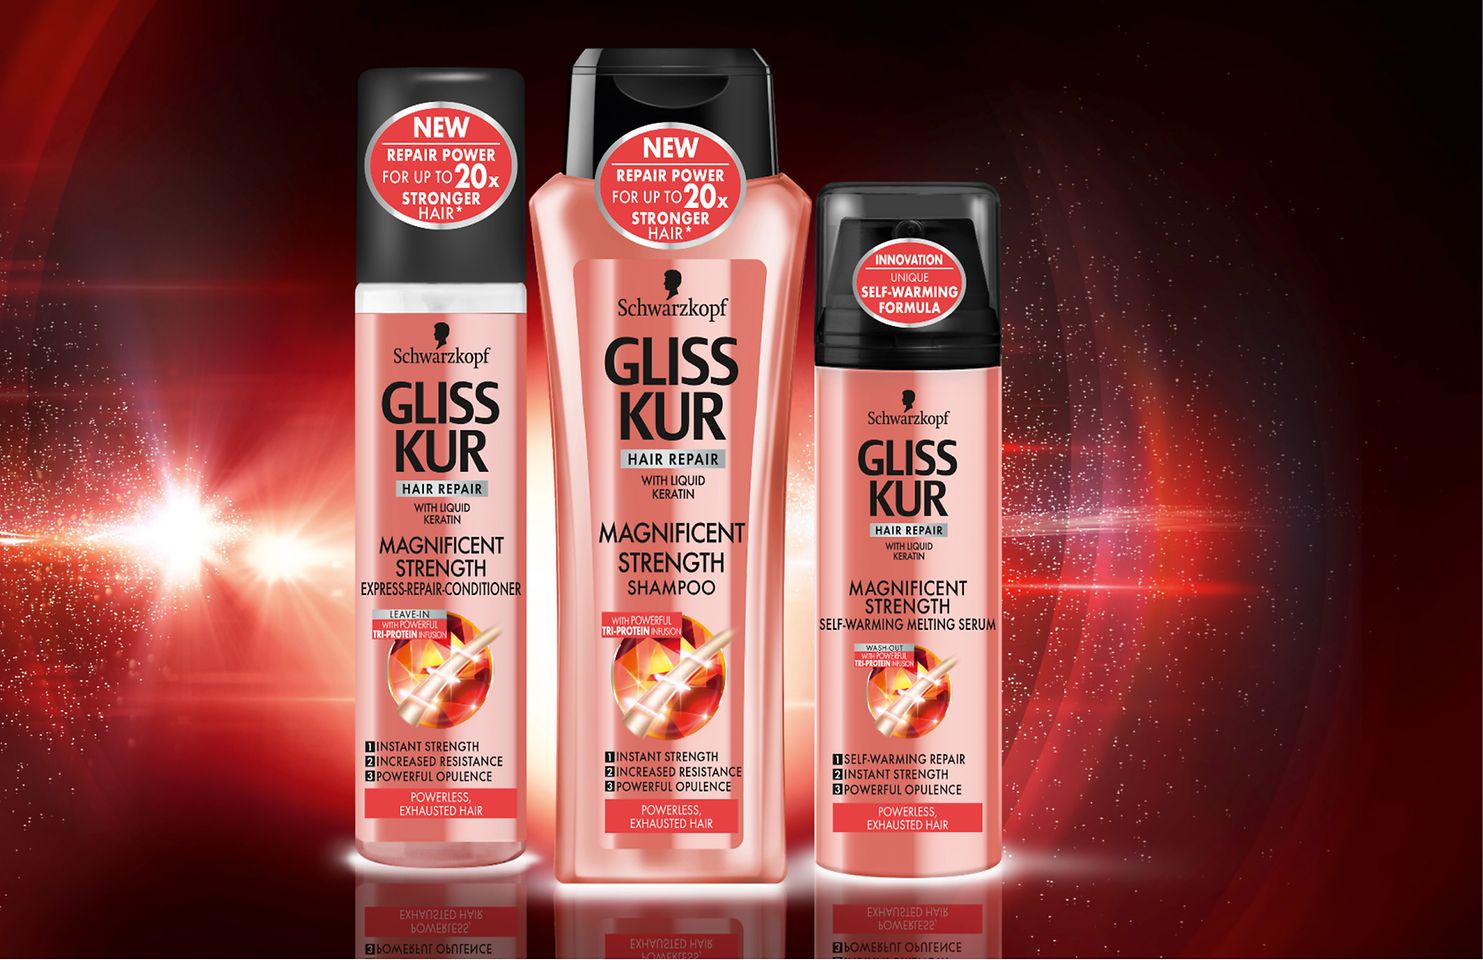 
Innovations Q2/2016: With the new product line Gliss Kur Magnificent Strength, the hair repair experts at Gliss Kur have filled a gap in the hair care market, offering a range specifically for lackluster, weakened hair.